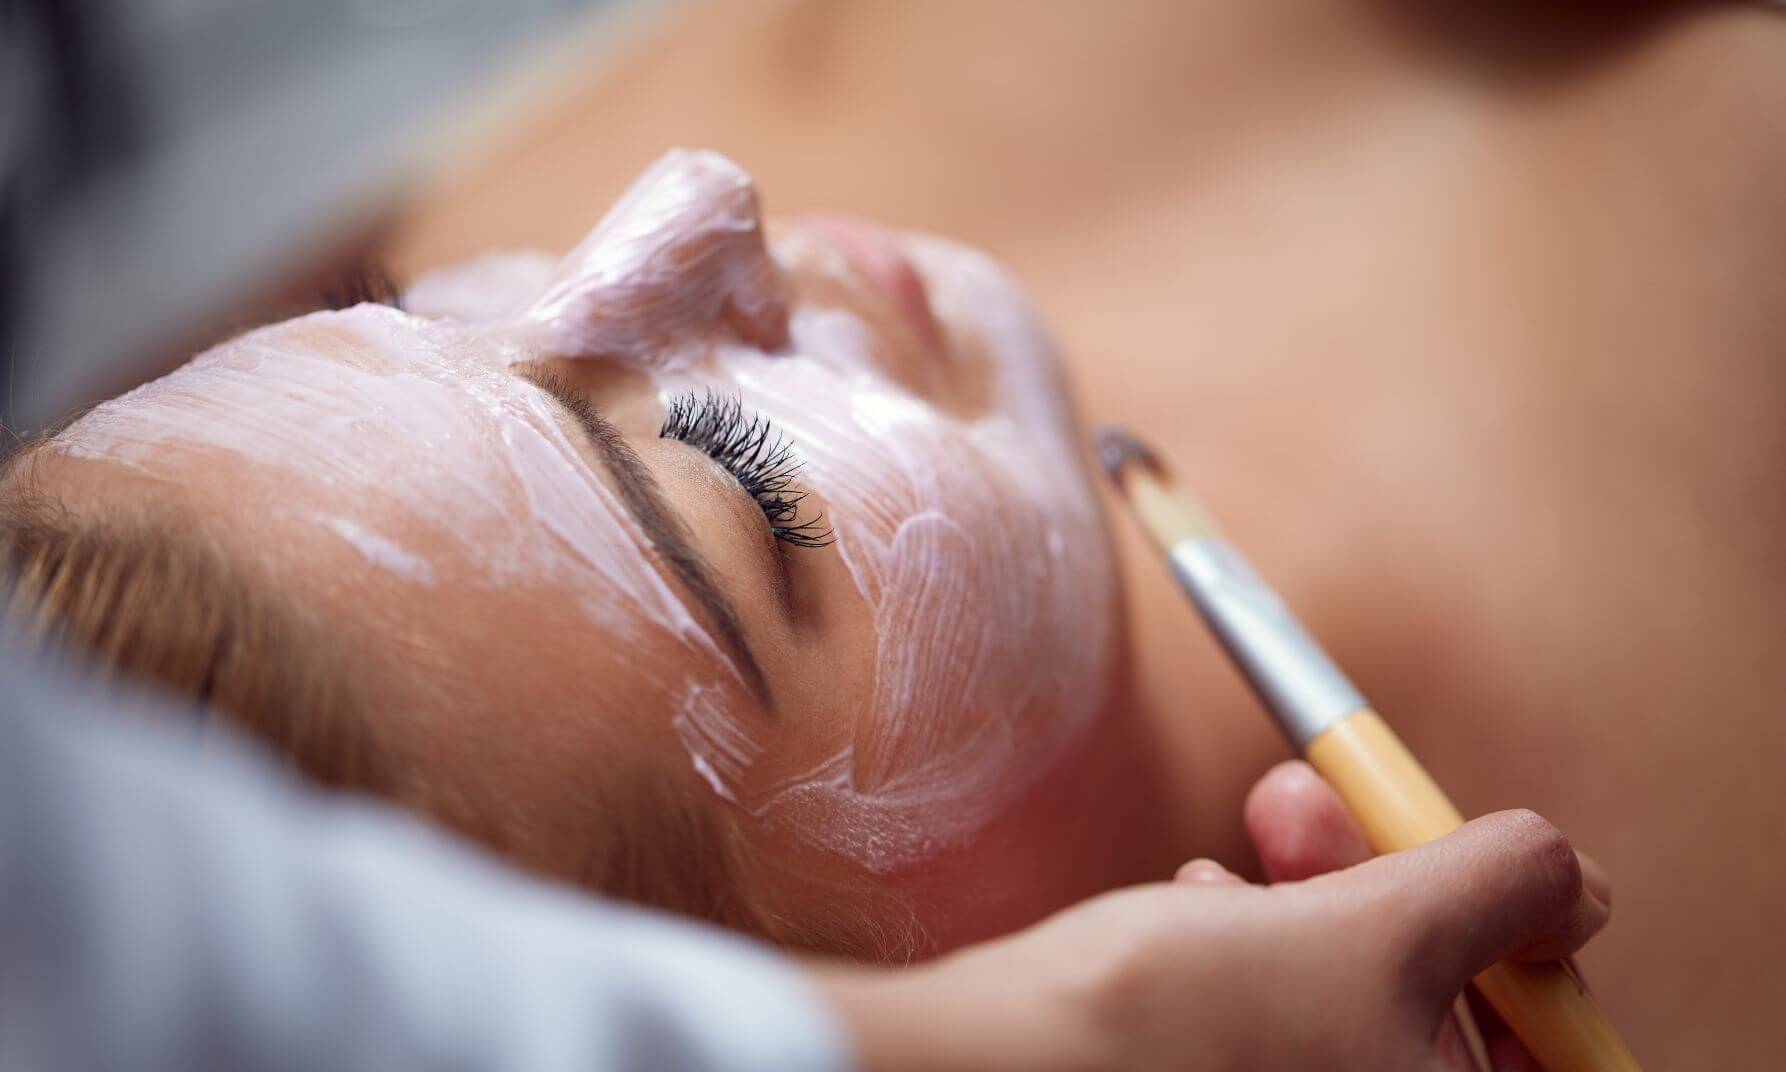 What Are The Benefits Of Cosmetic Peels?